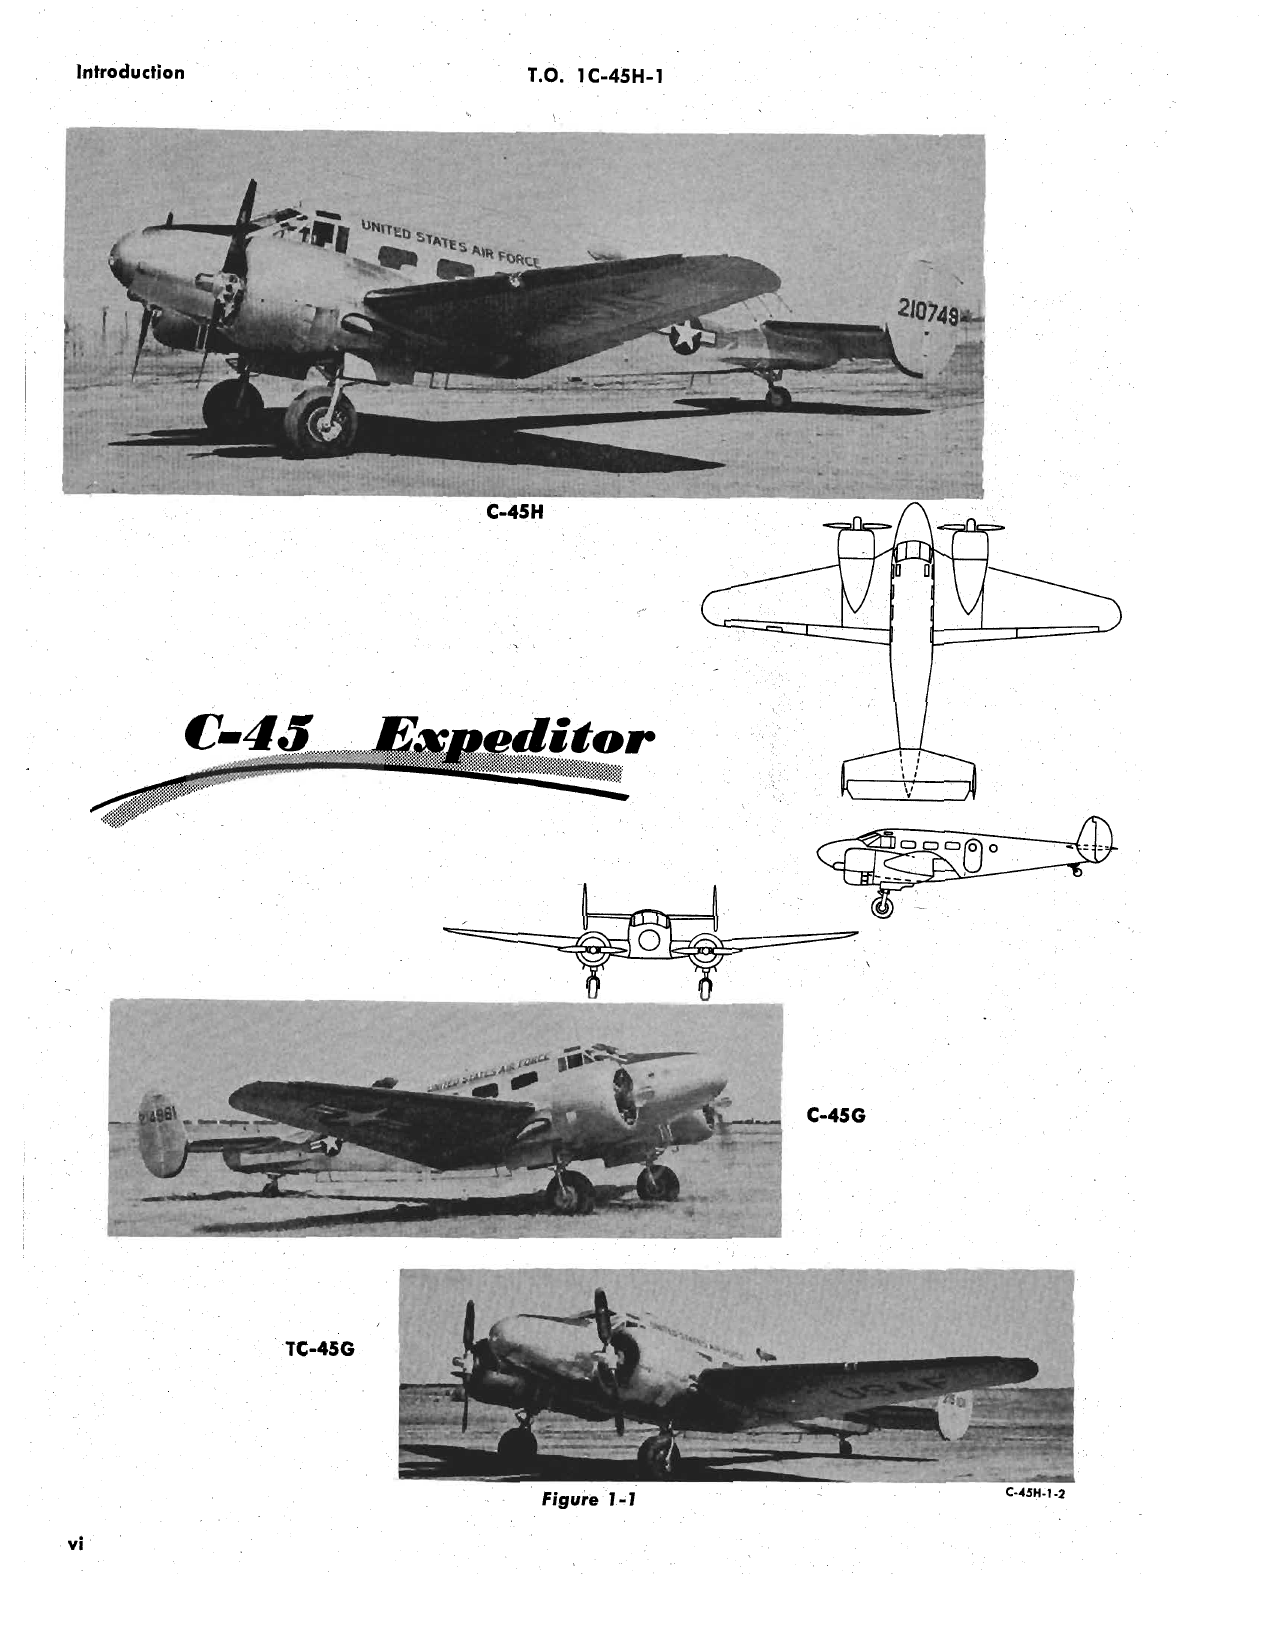 Sample page 8 from AirCorps Library document: Flight Handbook for C-45G, TC-45G, and C-45H Aircraft